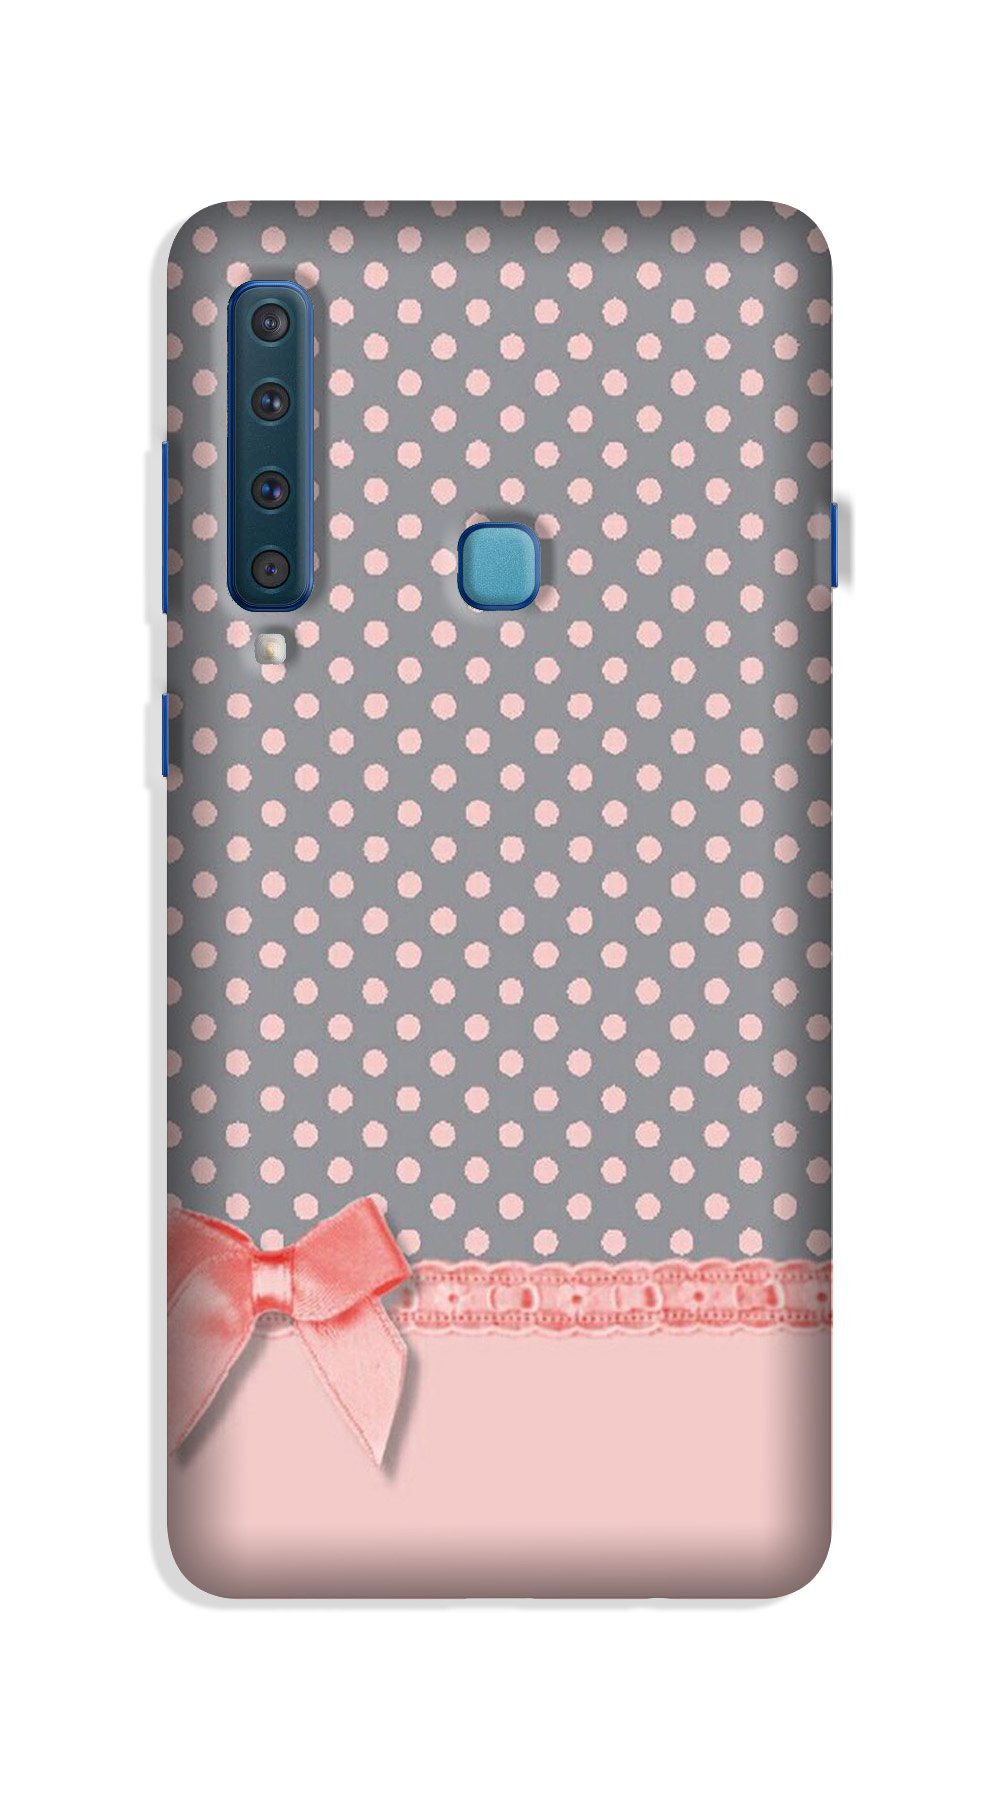 Gift Wrap2 Case for Galaxy A9 (2018)